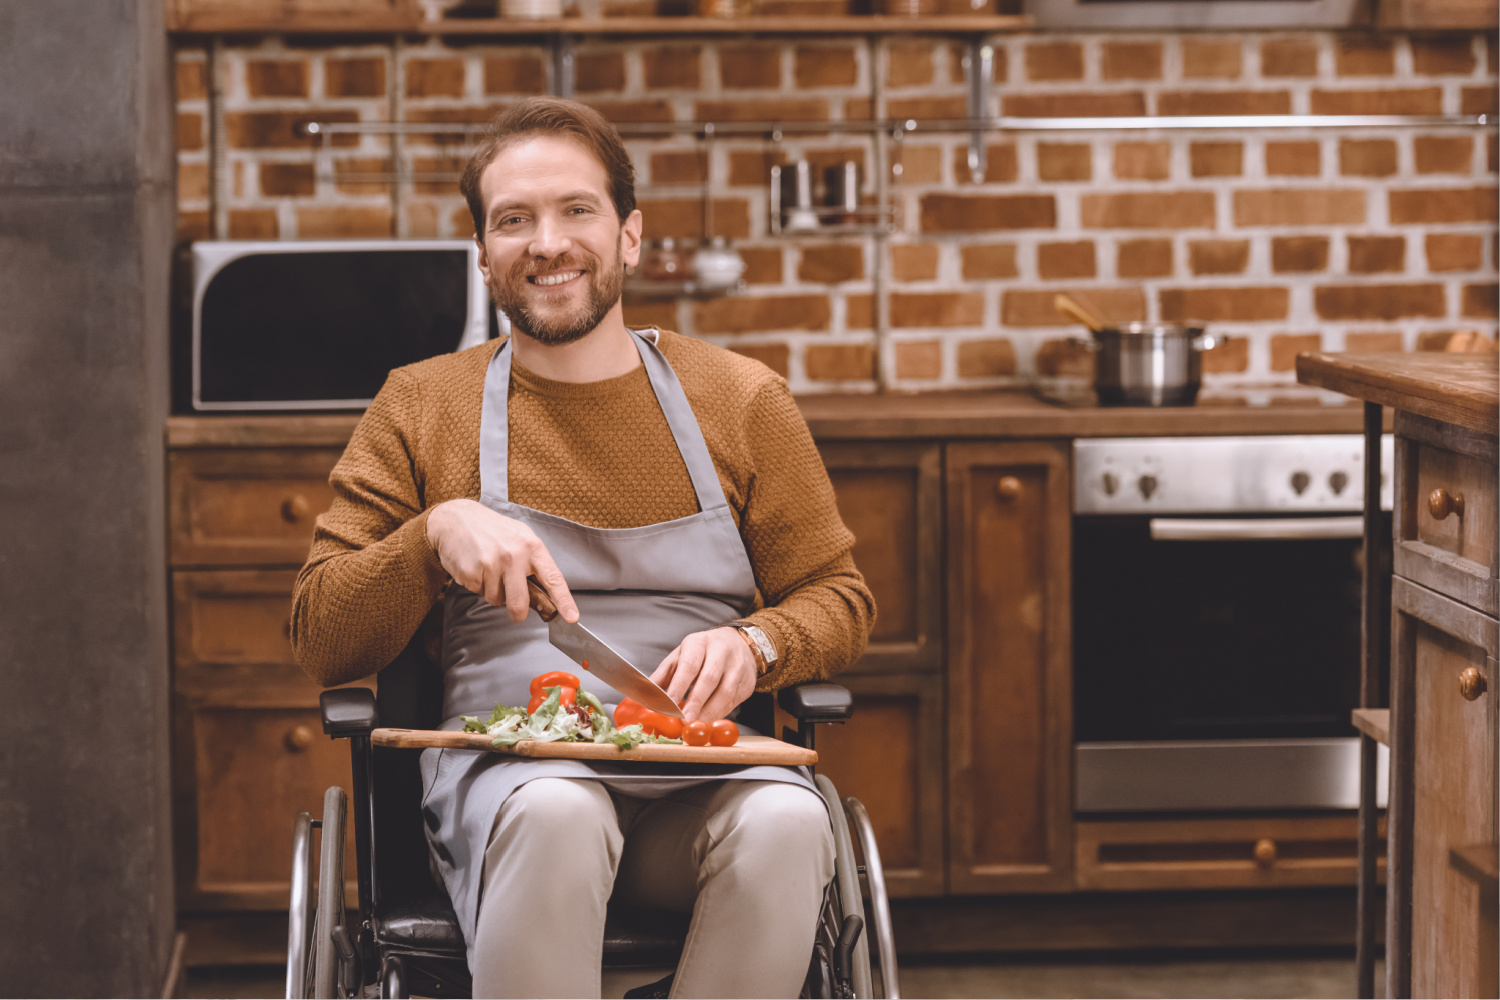 How Cooking Culture Excludes People With Disabilities